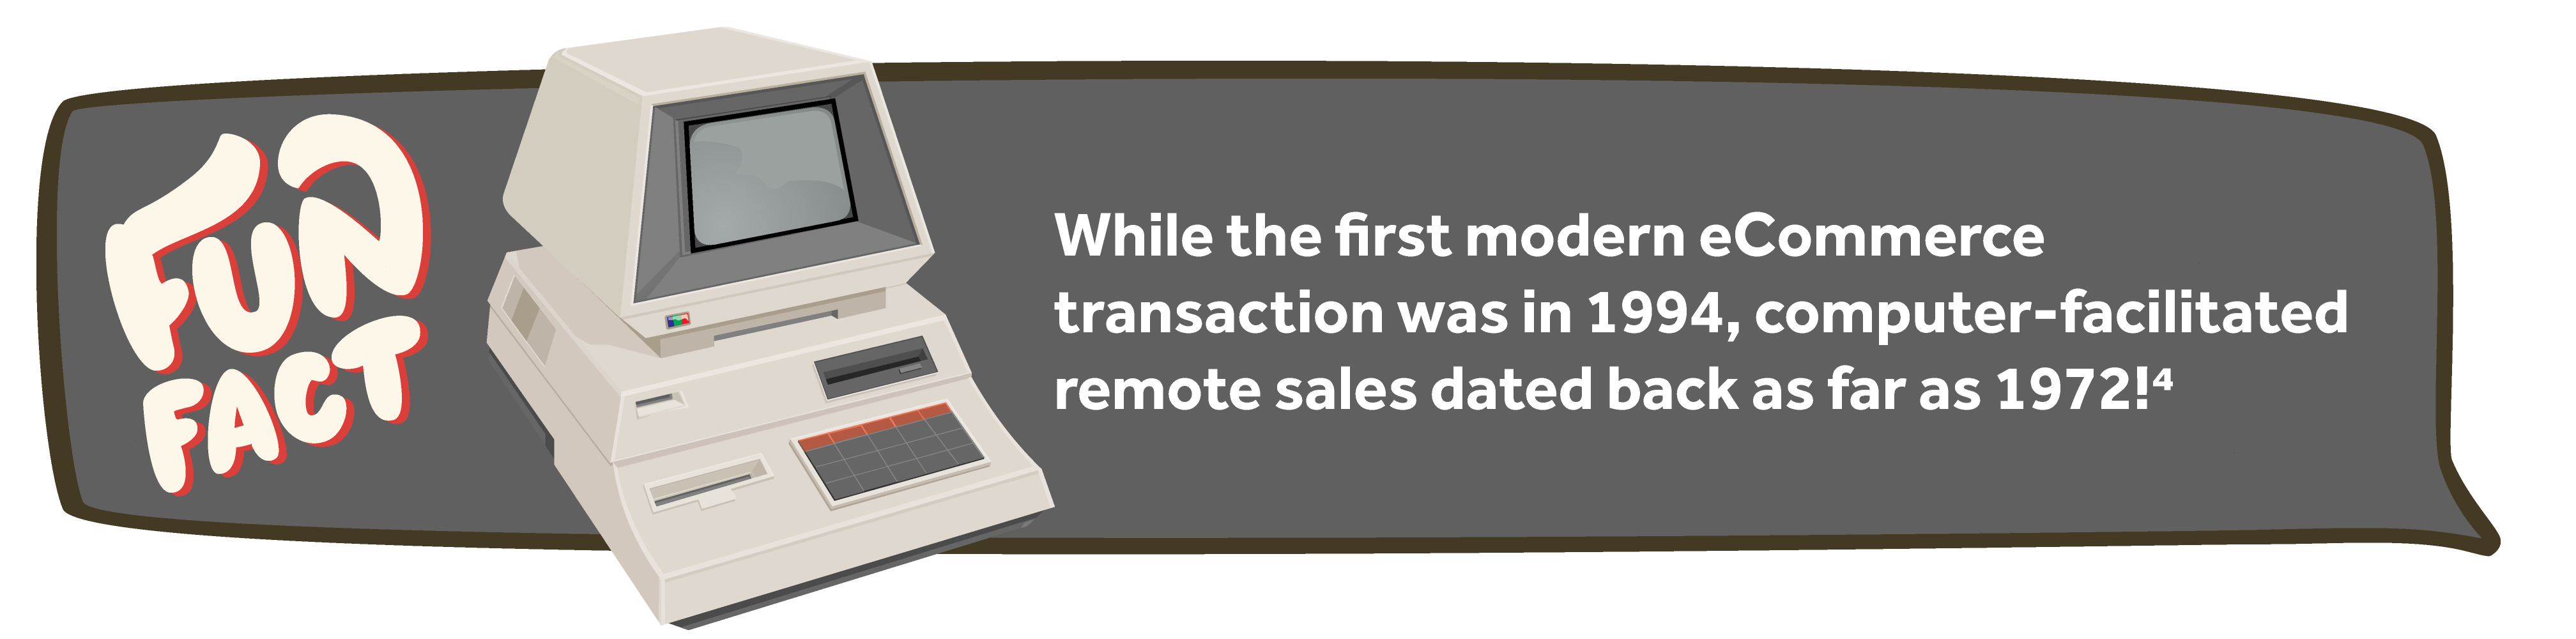 computer-facilitated remote sales date back to 1972